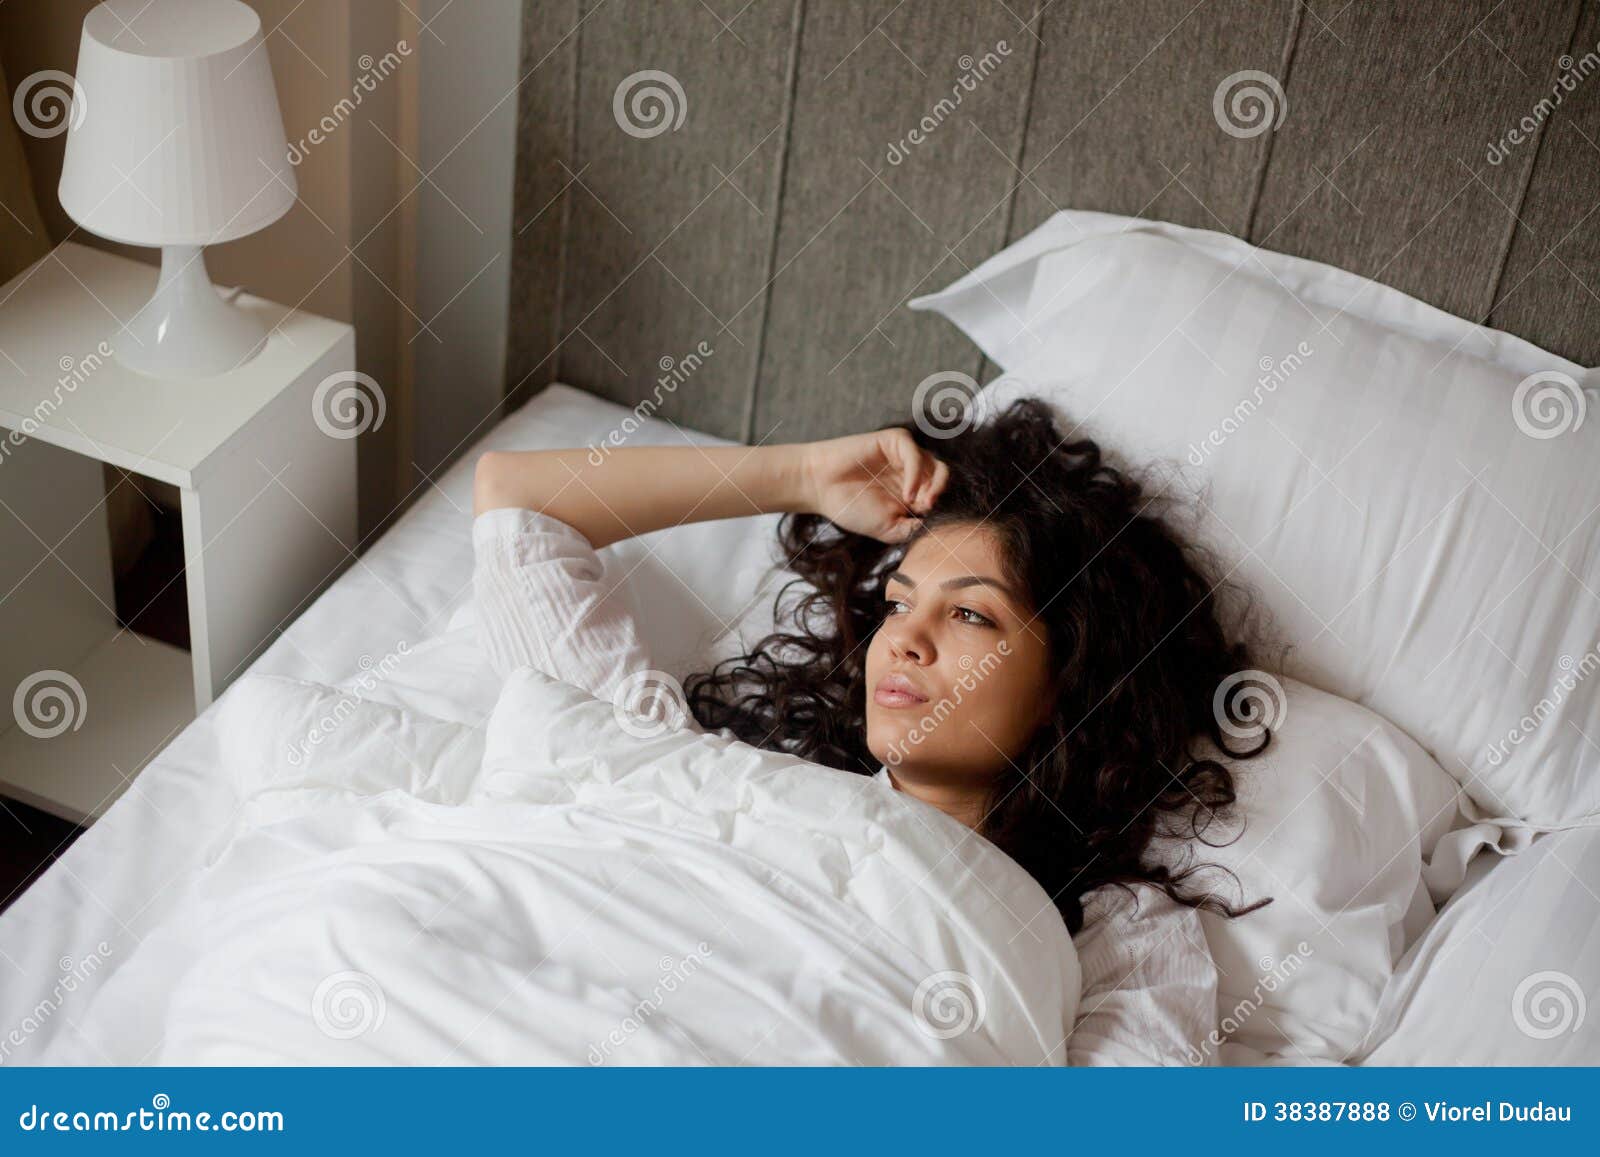 thoughtful woman in bed